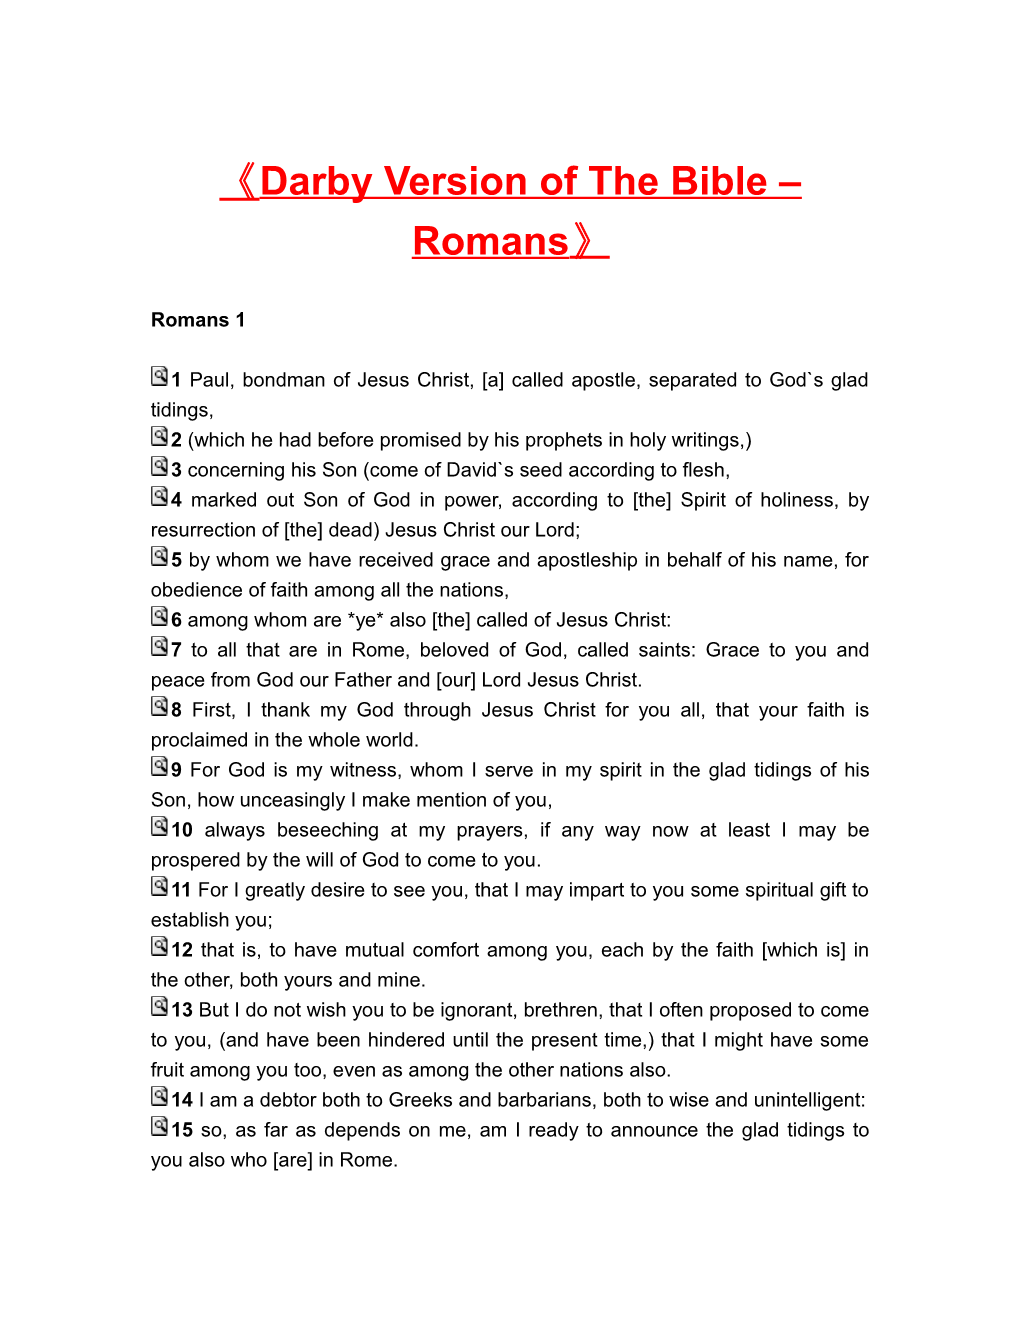 Darby Version of the Bible Romans